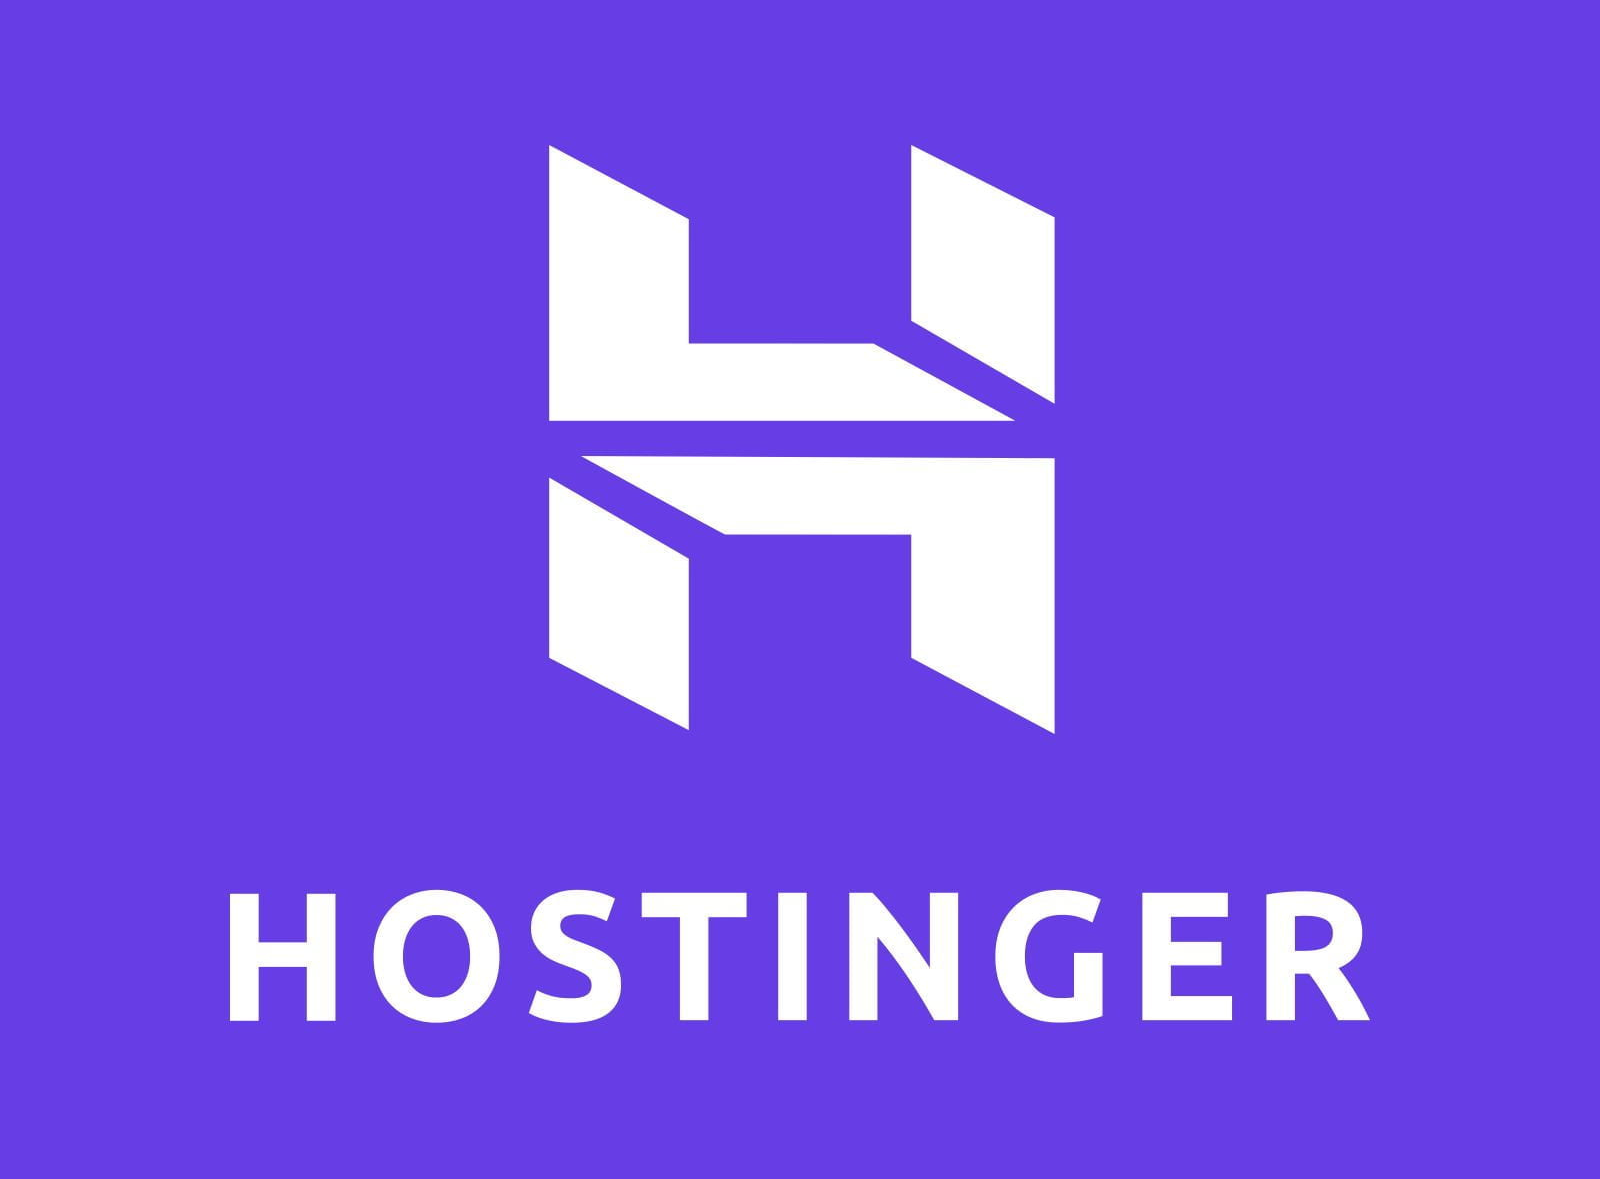 Hostinger Review From Our Experts